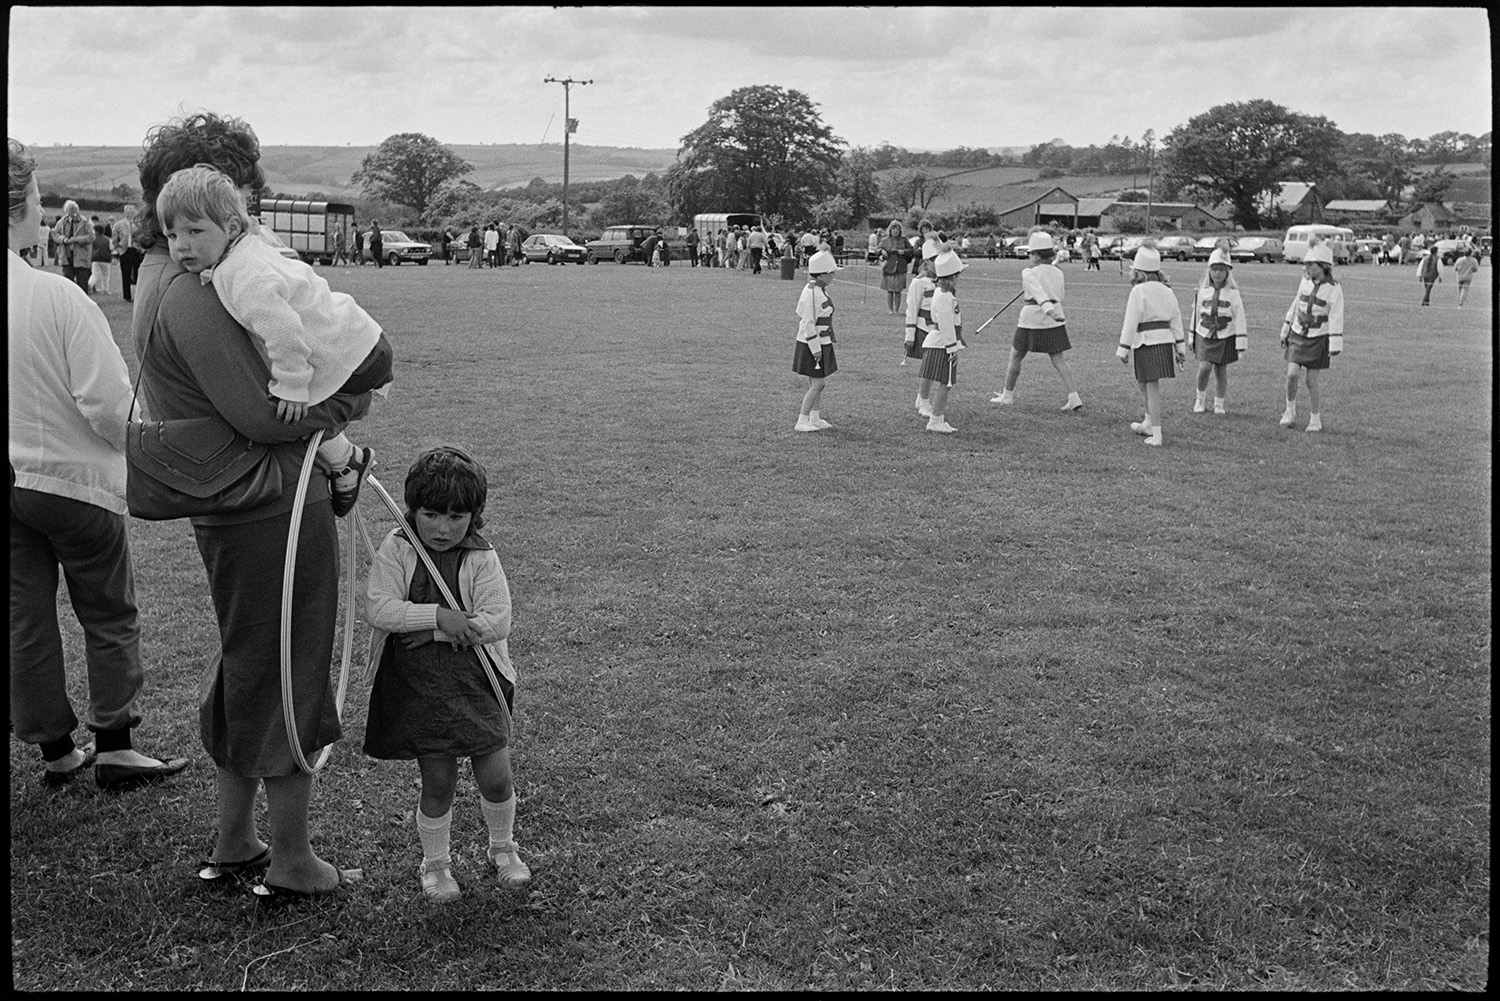 School fete, drum majorettes competition, early tractor display, mothers and children.
[A woman with two young children holding hula-hoops, watching majorettes getting ready to perform at the Chulmleigh School Fete, in a field. Parked cars and trailers can be seen in the background.]